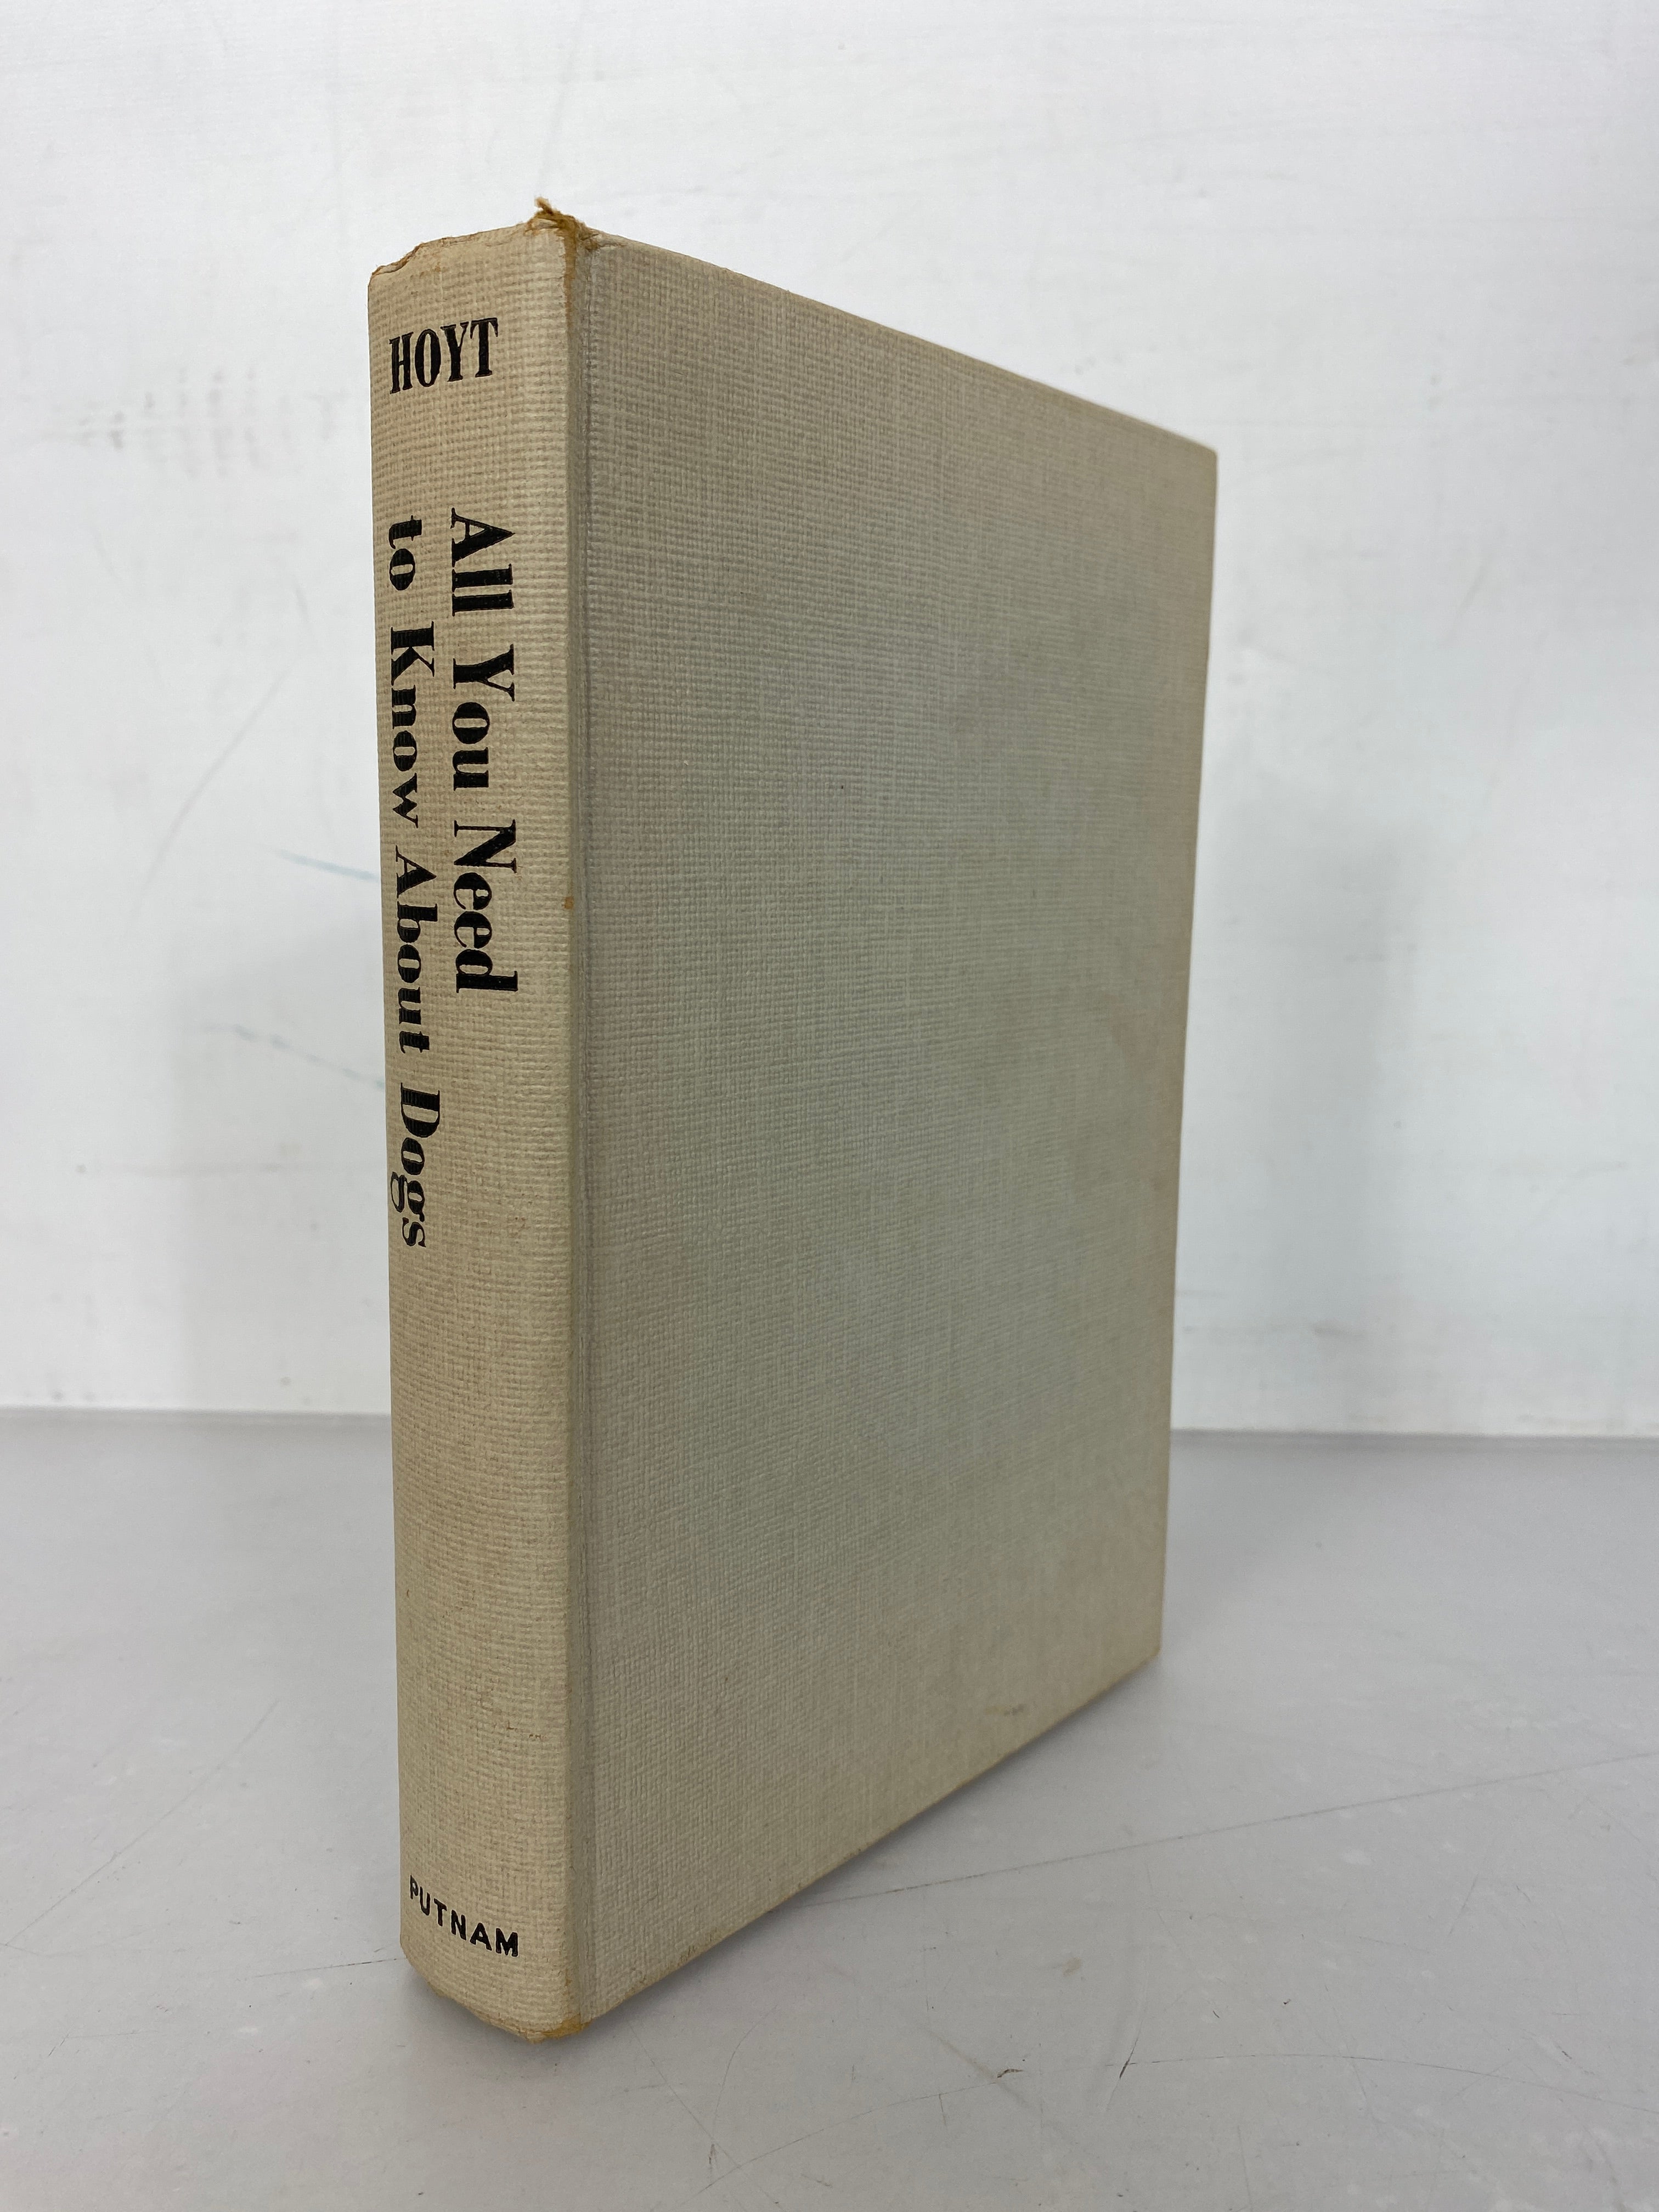 All You Need to Know About Dogs by Hoyt 1956 First Edition HC